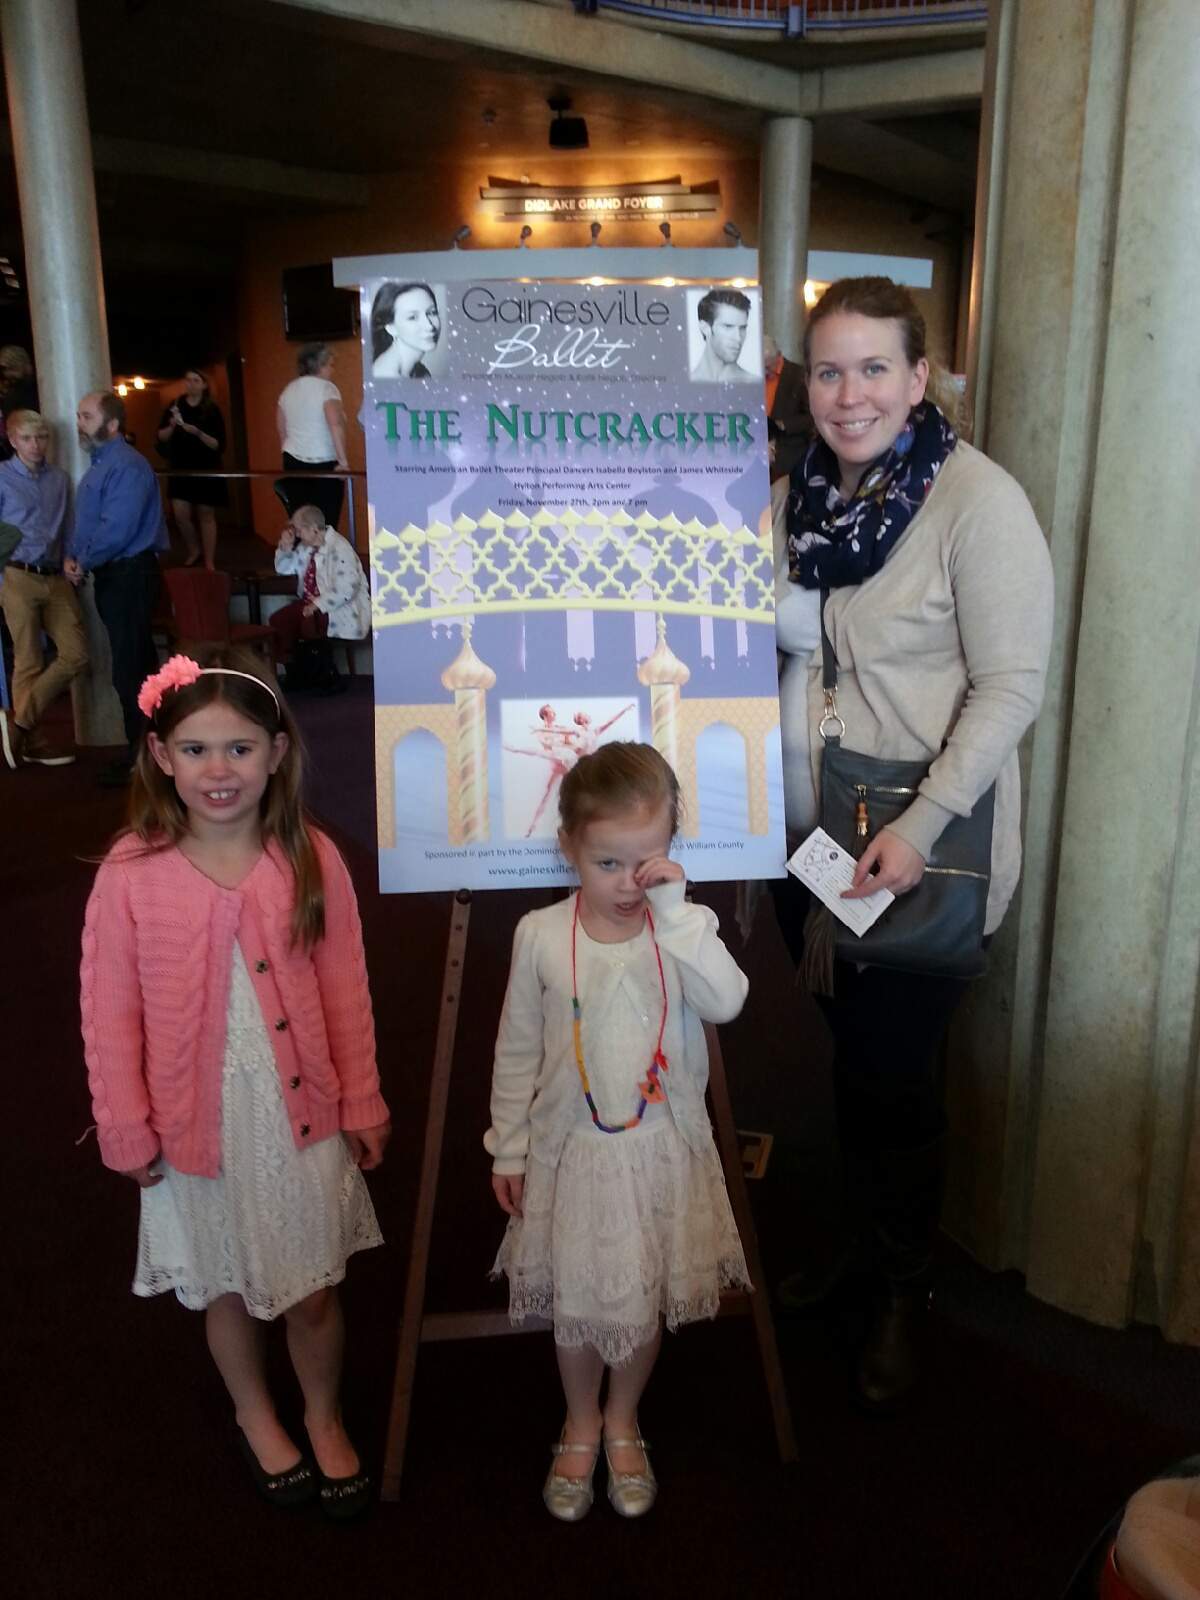 The Nutcracker - Performed by Gainesville Ballet - Matinee